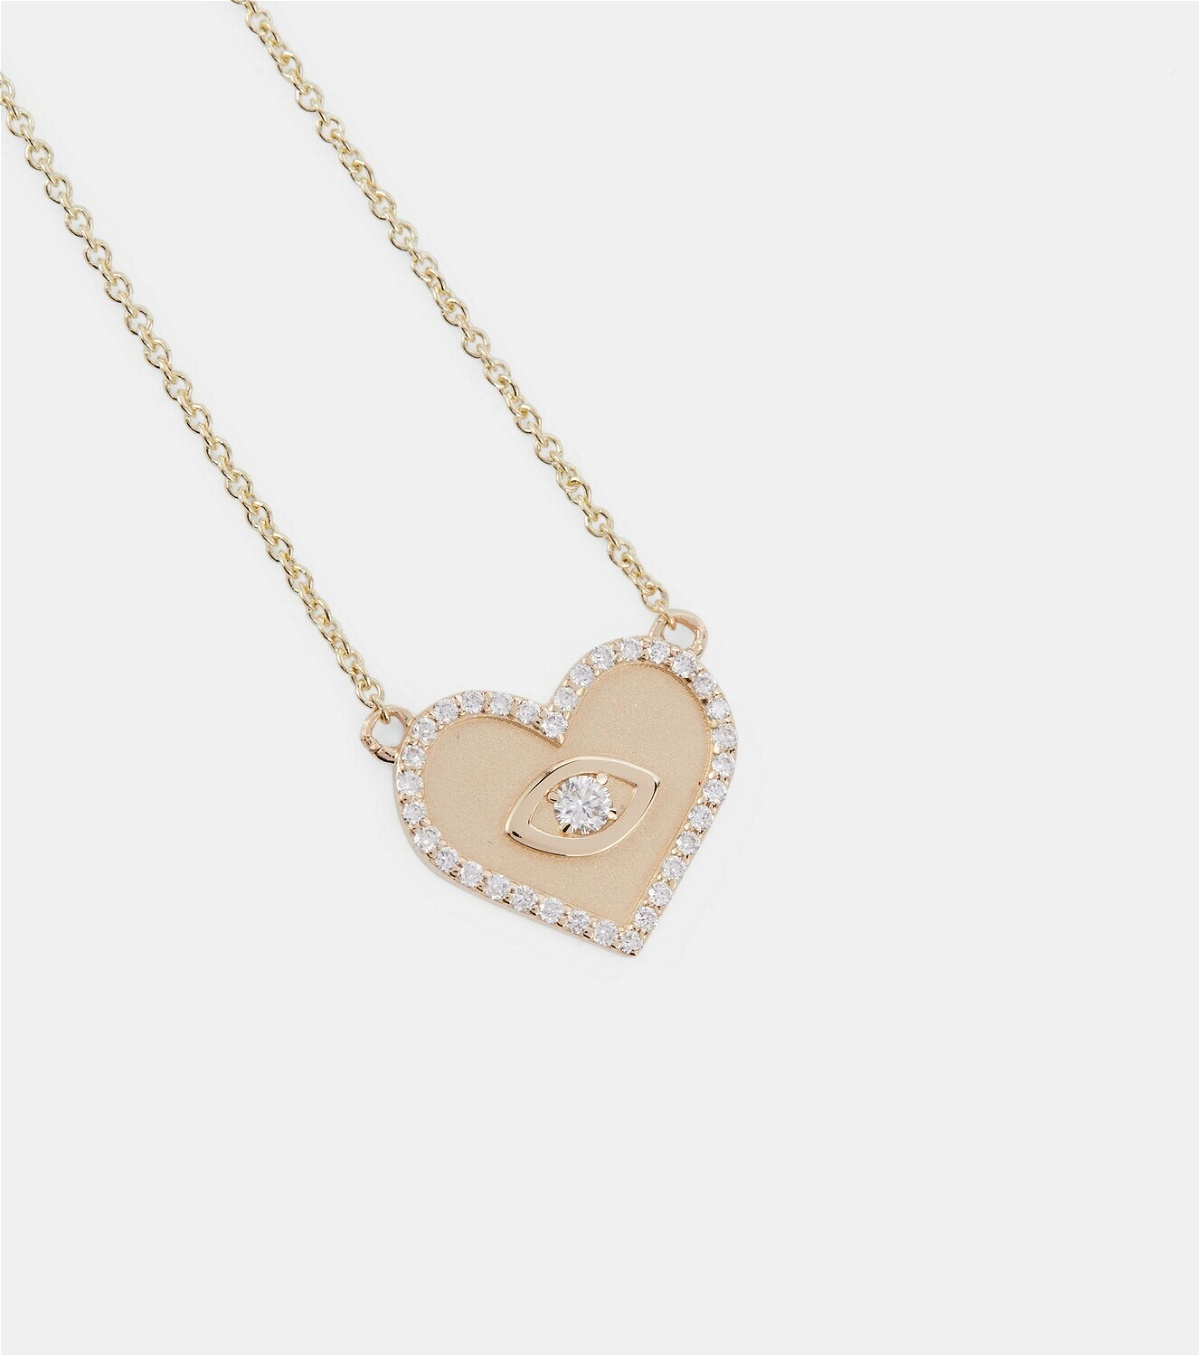 Sydney Evan Heart Marquis Eye 14kt gold necklace with diamonds